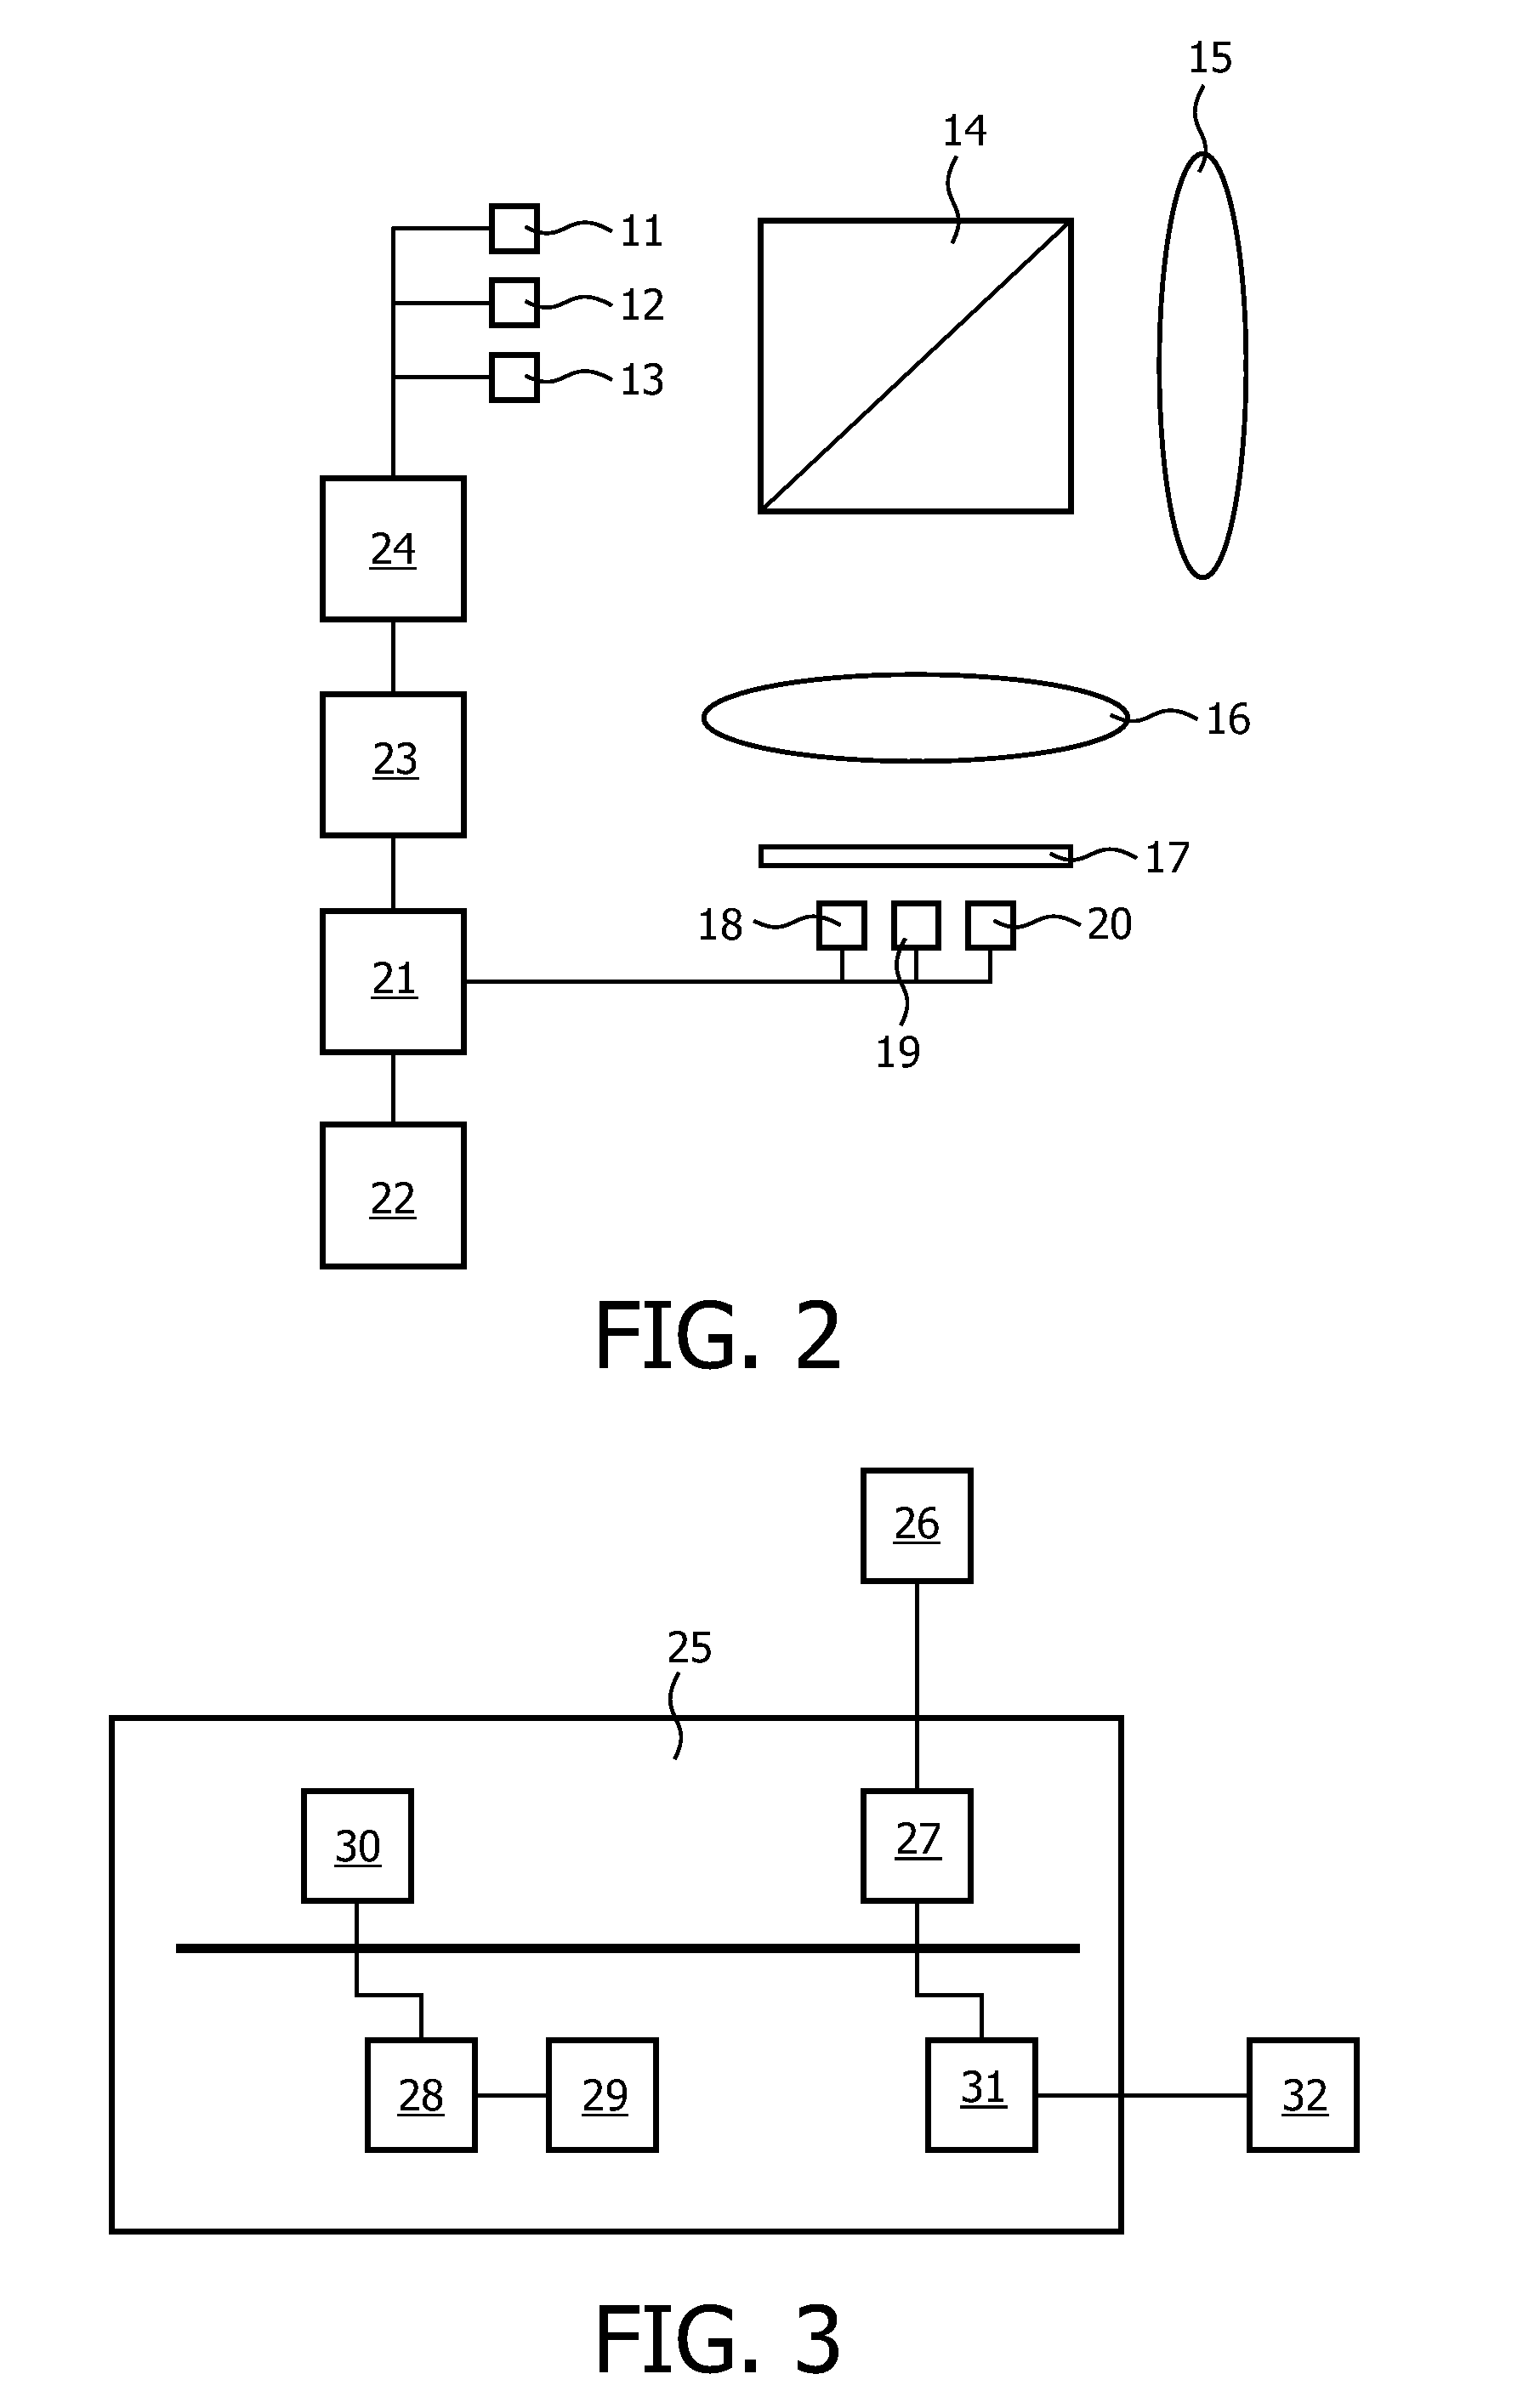 Method and system for carrying out photoplethysmography